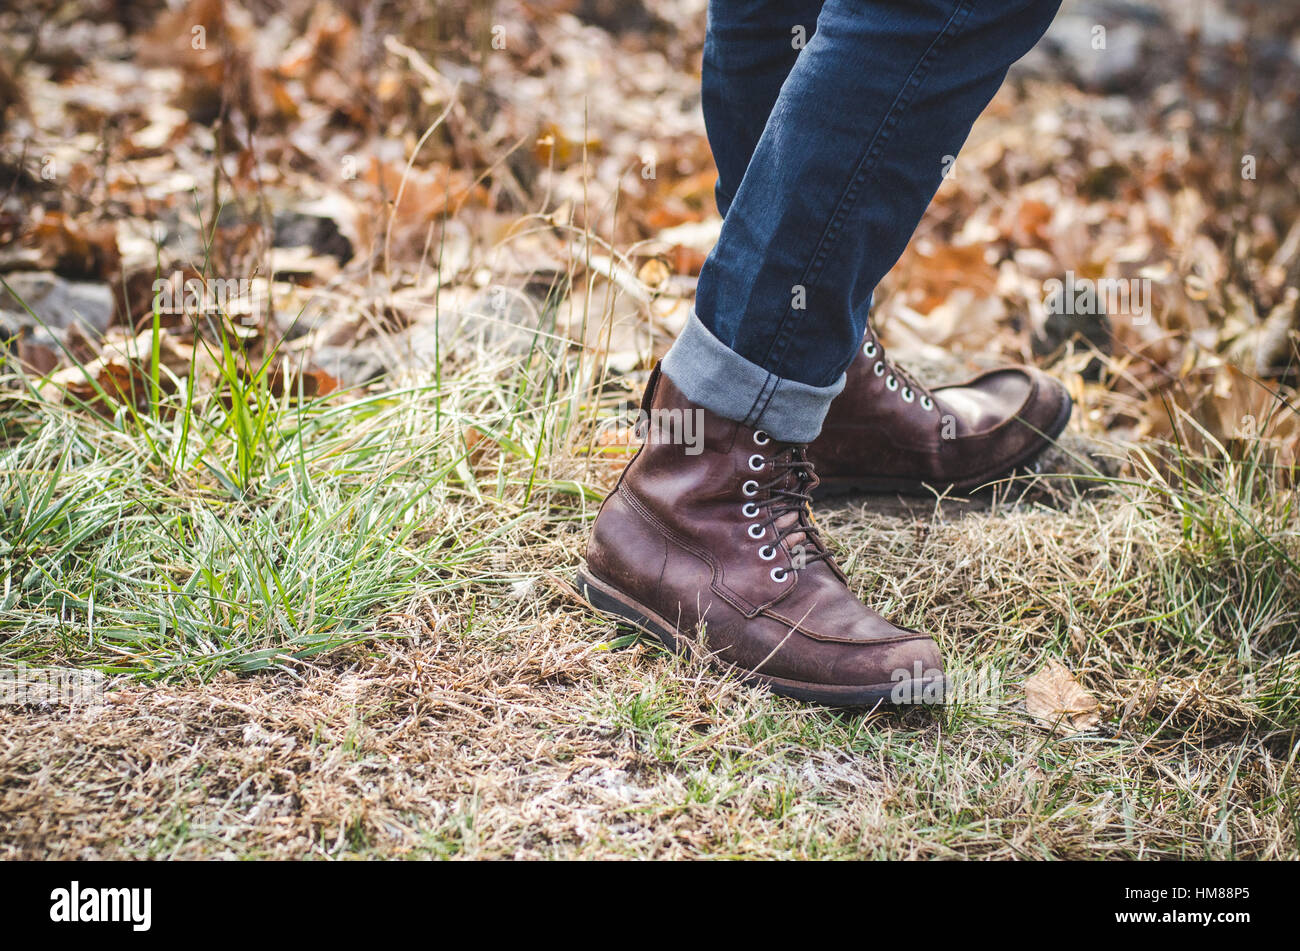 Man Wearing Cuffed Jeans and Boots on Grass Stock Photo - Alamy